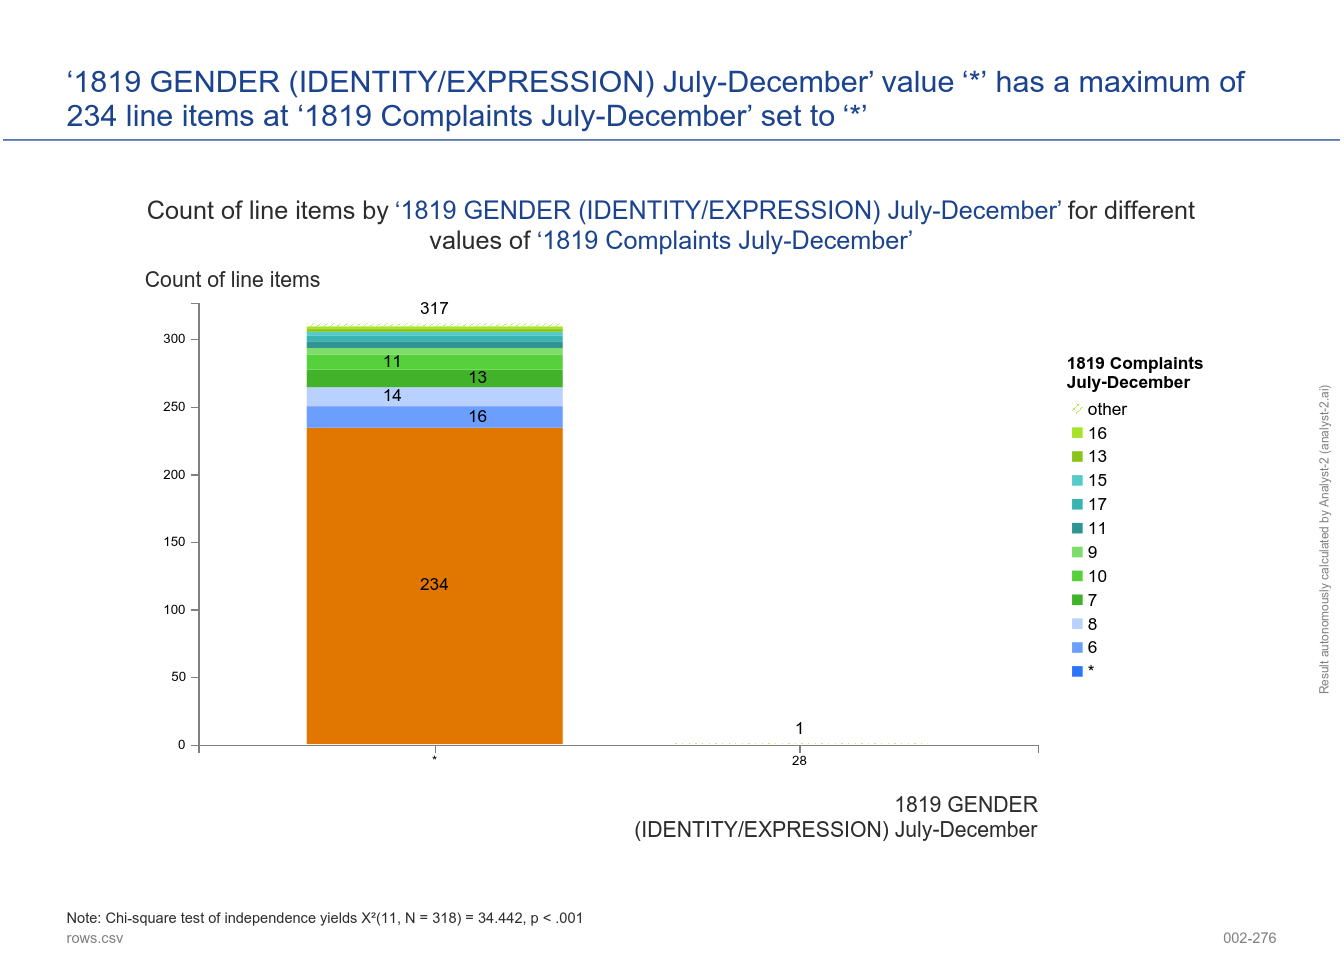 ‘1819 GENDER (IDENTITY/EXPRESSION) July-December’ value ‘*’ has a maximum of 234 line items at ‘1819 Complaints July-December’ set to ‘*’. (2018-2019 Bullying Harassment Discrimination Bi- Annual Report - 002-276)